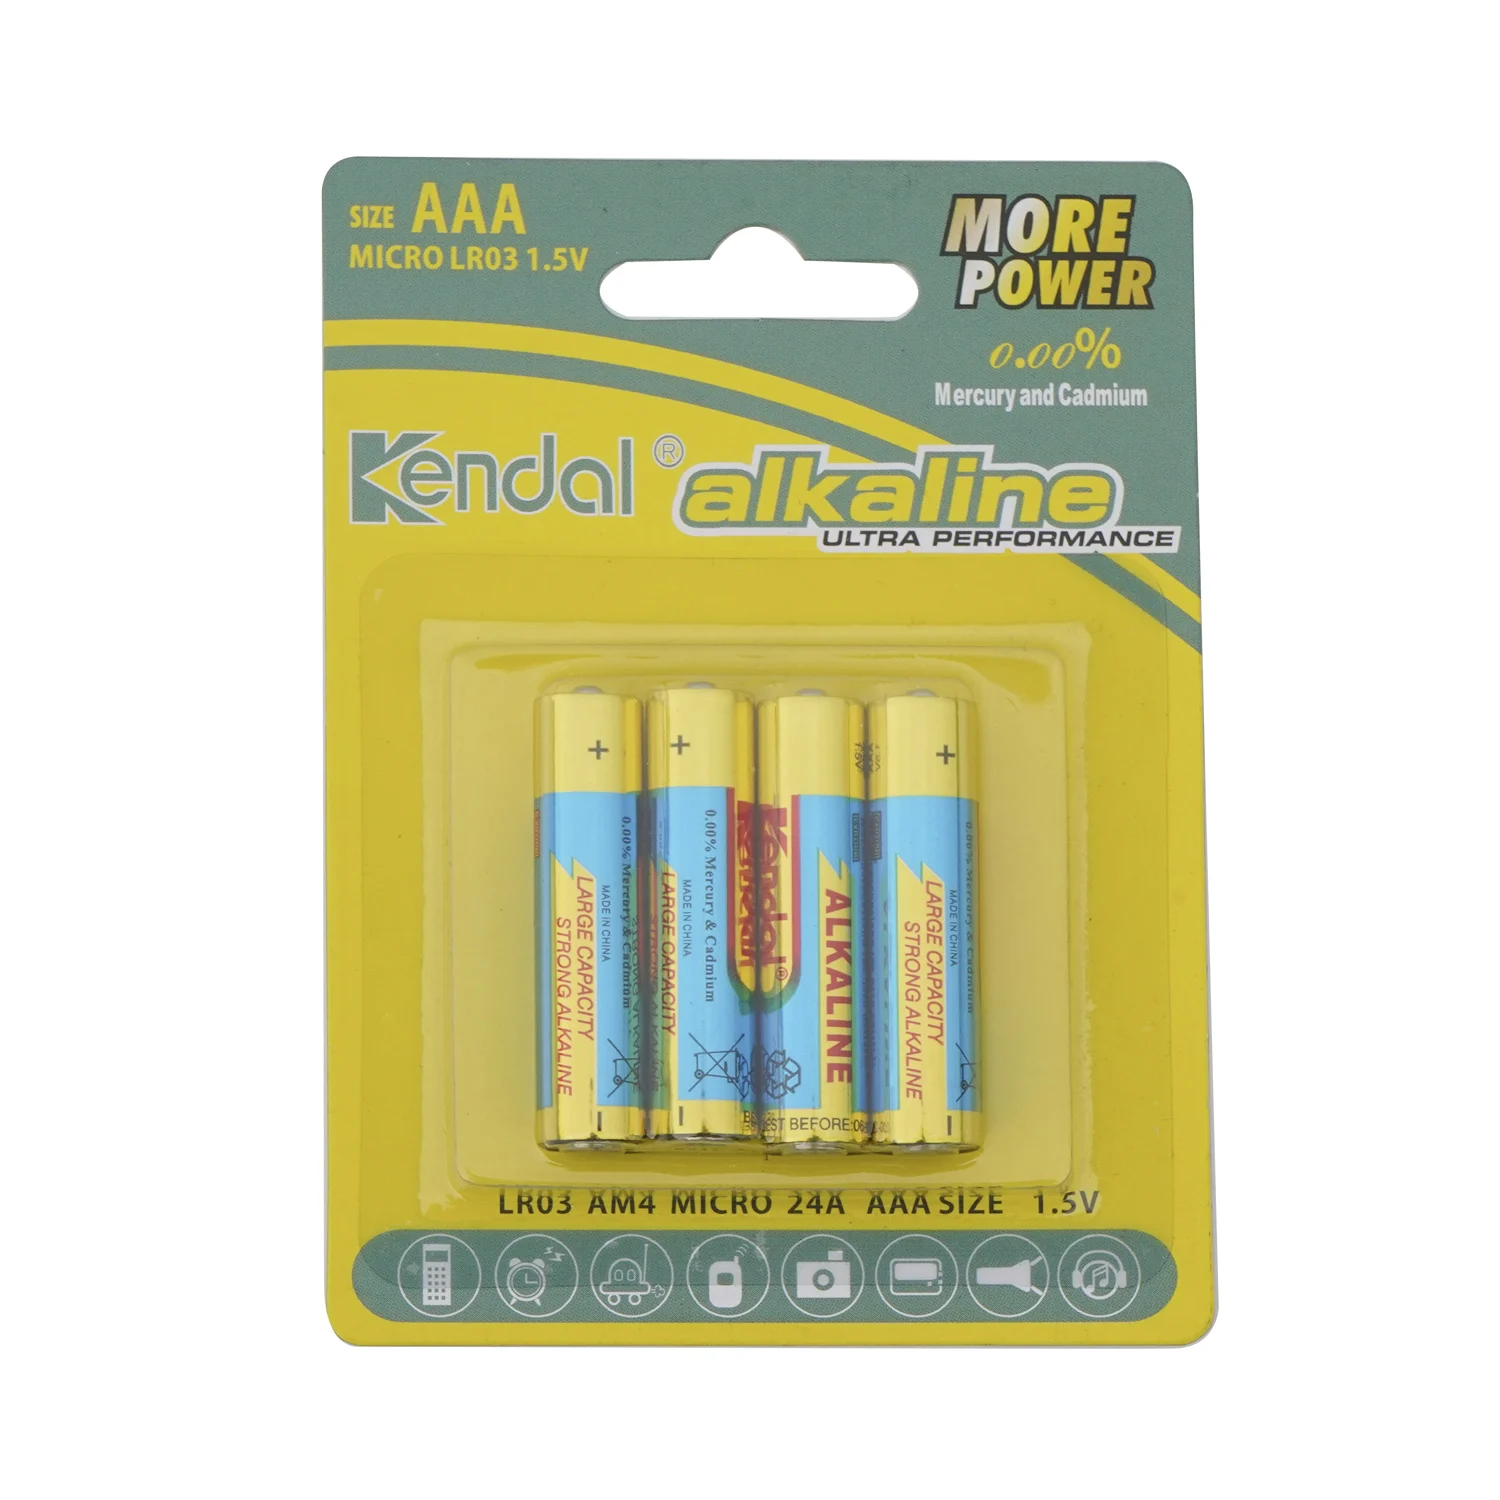 KENDAL Ultra Power Mercury and Cadmium Free Alkaline MN1400 1.5v LR14 C Size Batteries 8 Count 